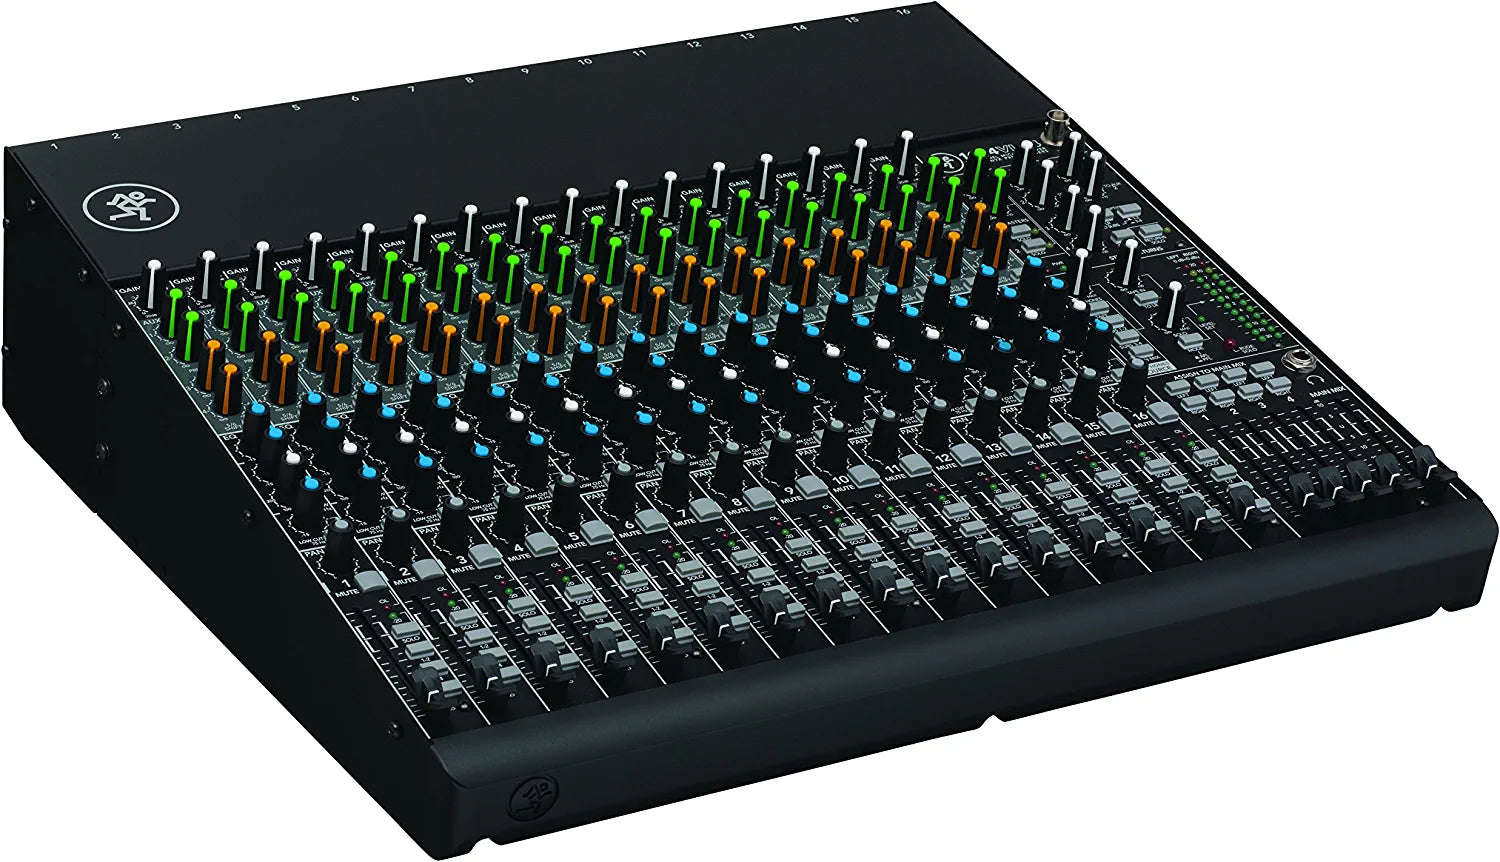 Mackie 1604VLZ4 16-channel Mixer 4-Bus Compact Mixer with Ultra-wide 60dB gain range and 16 Onyx Mic Preamps